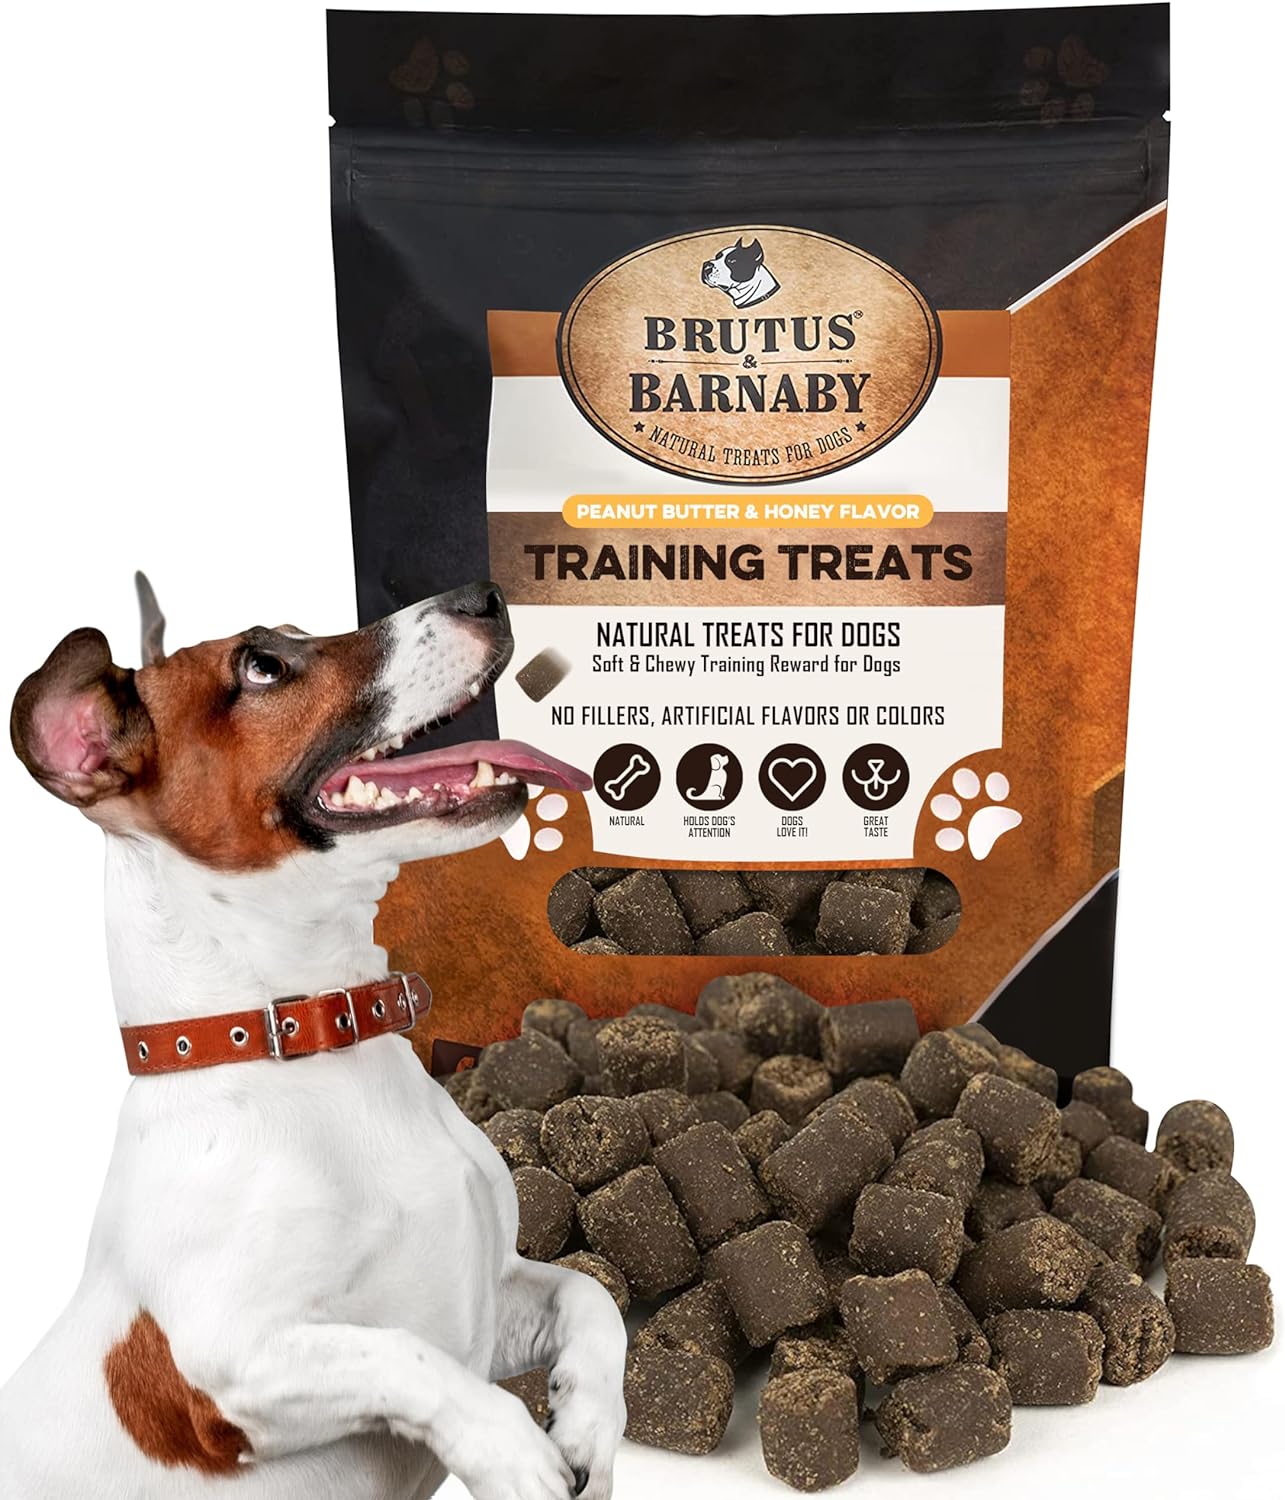 BRUTUS & BARNABY Training Treats for Dogs - Peanut Butter & Honey - All-Natural Healthy Low Calorie Vegetarian Treat - Great to Use for Rewards in Training Your Puppy Or Dog